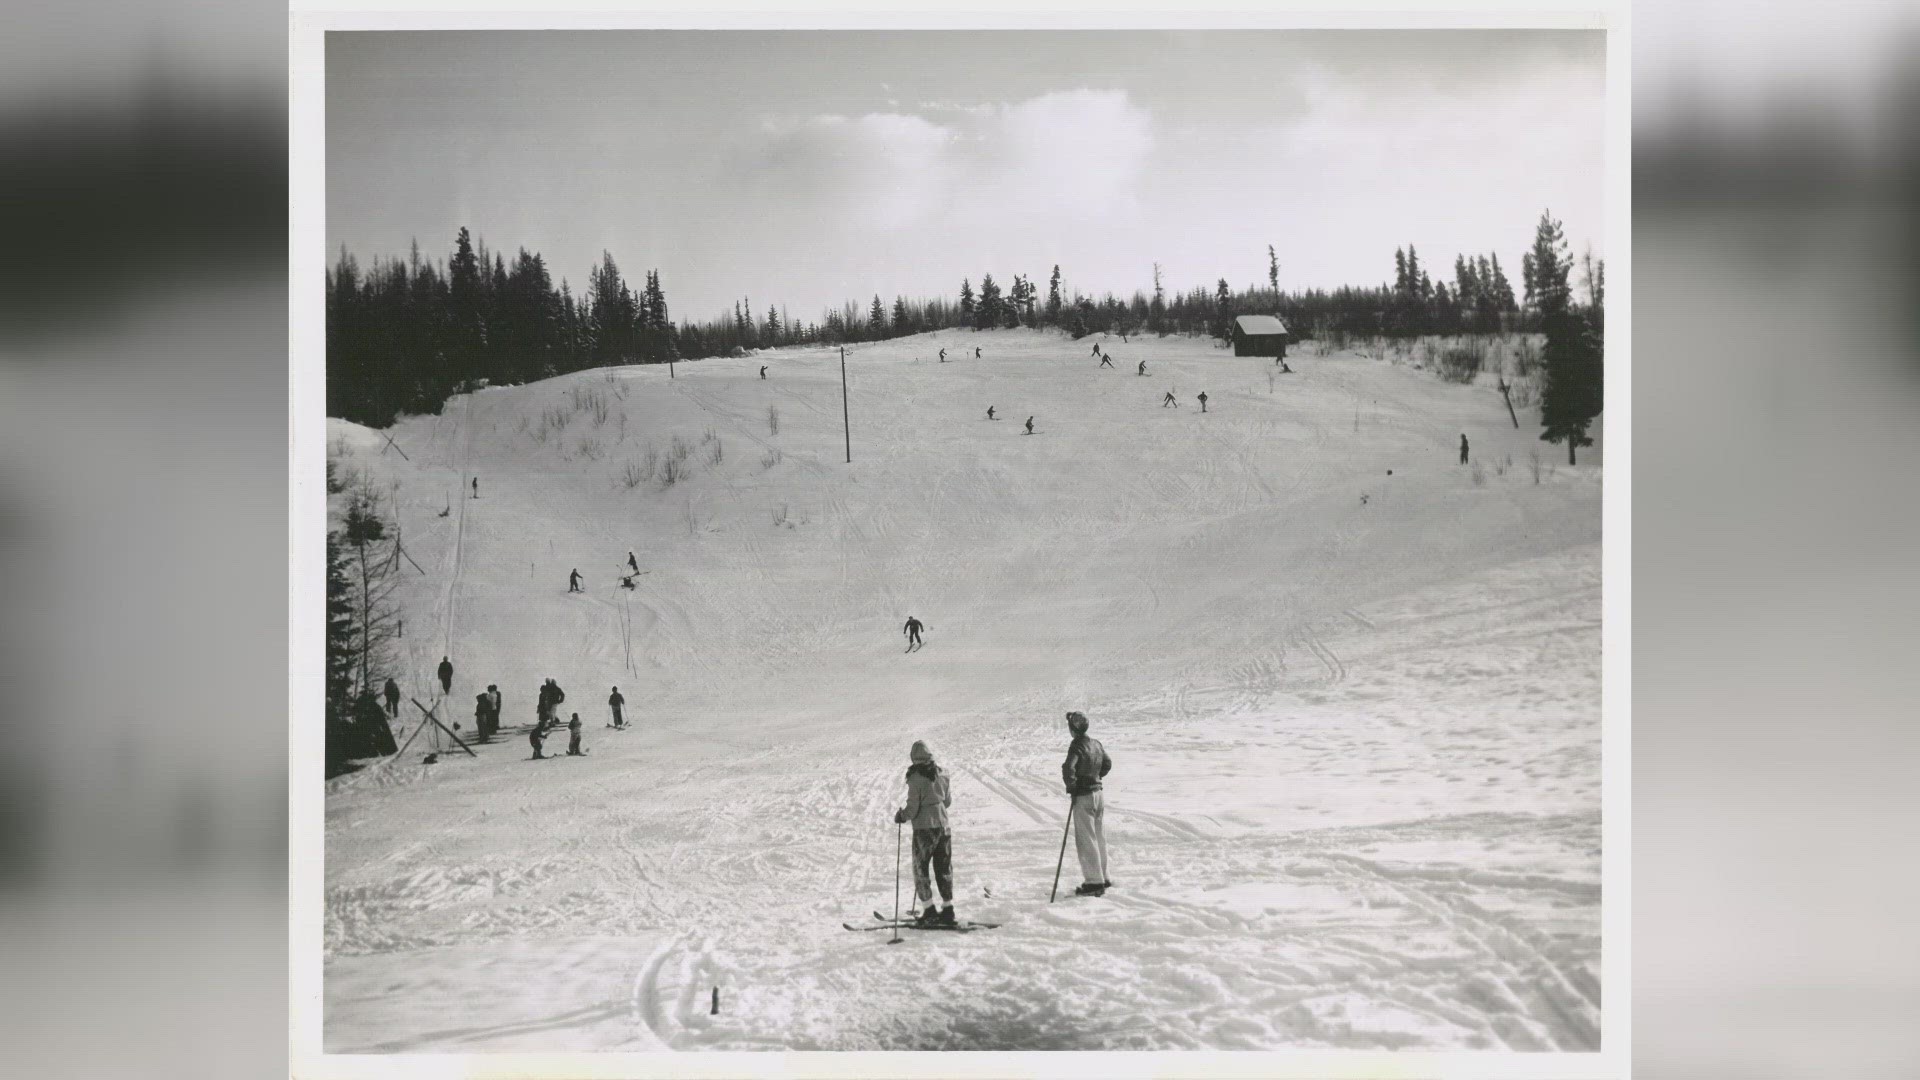 Through community fundraising, the company managed to raise up to $2.1 million to buy the land around the iconic sled hill.